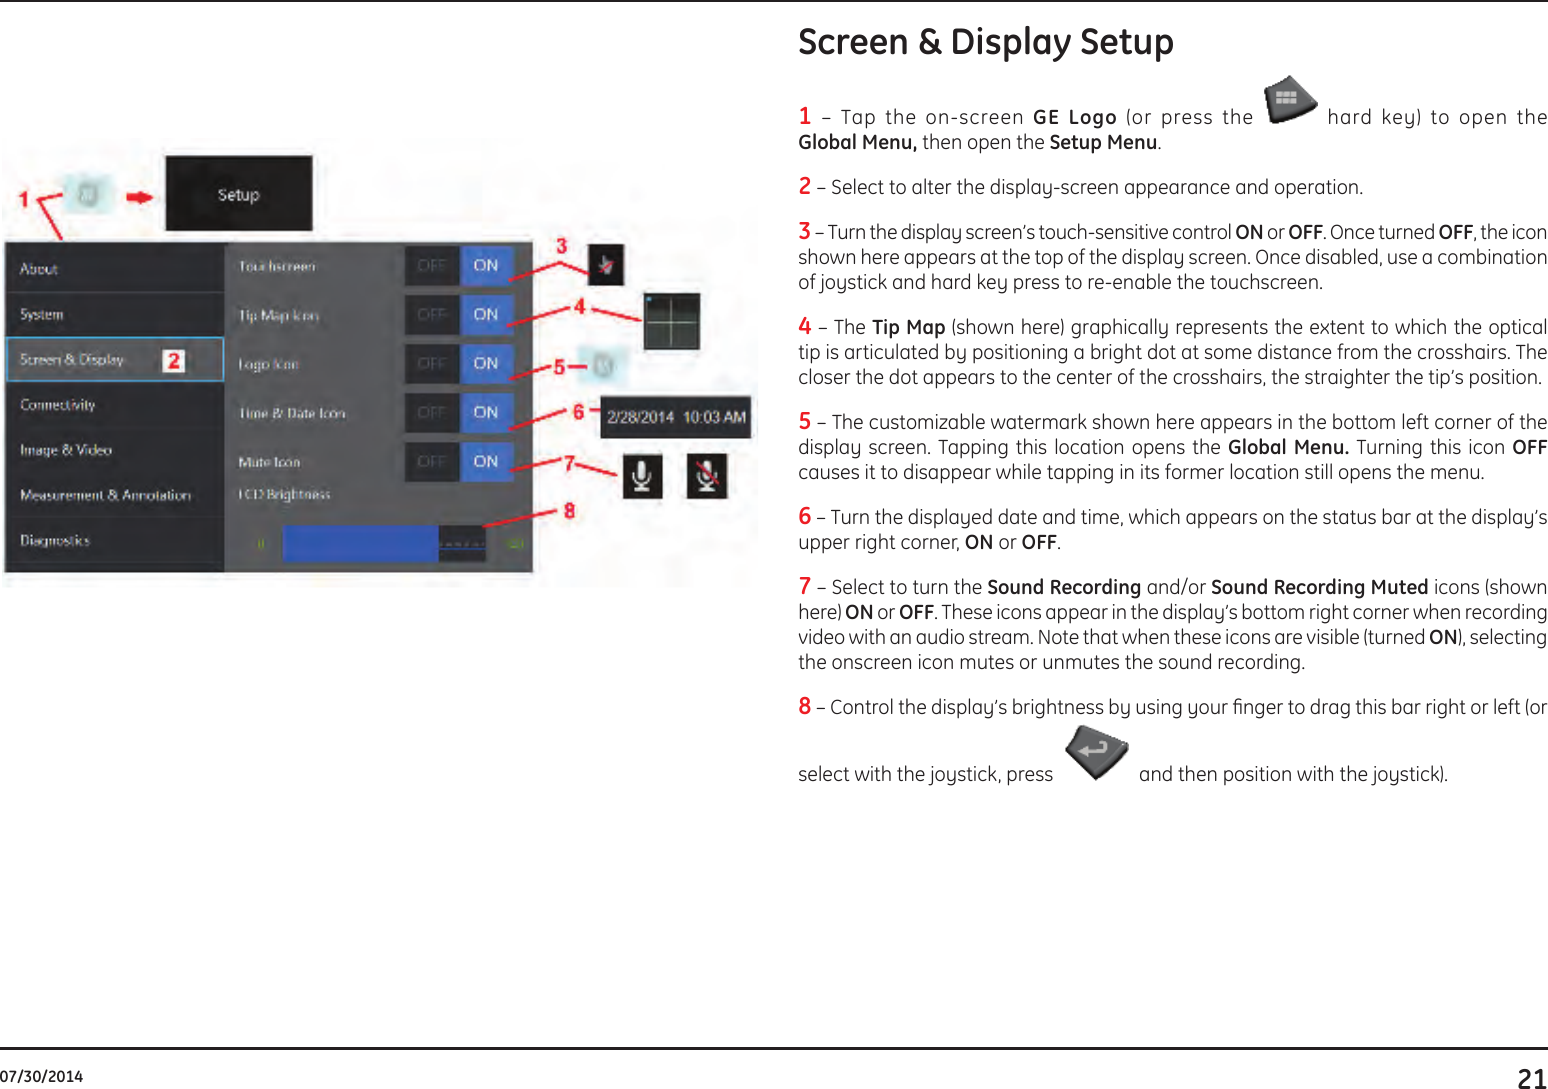 2107/30/2014Screen &amp; Display Setup 1 – Tap the on-screen GE Logo (or press the   hard key) to open the  Global Menu, then open the Setup Menu. 2 – Select to alter the display-screen appearance and operation.  3 – Turn the display screen’s touch-sensitive control ON or OFF. Once turned OFF, the icon shown here appears at the top of the display screen. Once disabled, use a combination of joystick and hard key press to re-enable the touchscreen. 4 – The Tip Map (shown here) graphically represents the extent to which the optical tip is articulated by positioning a bright dot at some distance from the crosshairs. The closer the dot appears to the center of the crosshairs, the straighter the tip’s position. 5 – The customizable watermark shown here appears in the bottom left corner of the display screen. Tapping this location opens the Global Menu. Turning this icon OFF causes it to disappear while tapping in its former location still opens the menu.6 – Turn the displayed date and time, which appears on the status bar at the display’s upper right corner, ON or OFF.7 – Select to turn the Sound Recording and/or Sound Recording Muted icons (shown here) ON or OFF. These icons appear in the display’s bottom right corner when recording video with an audio stream. Note that when these icons are visible (turned ON), selecting the onscreen icon mutes or unmutes the sound recording.8 – Control the display’s brightness by using your nger to drag this bar right or left (or select with the joystick, press   and then position with the joystick). 